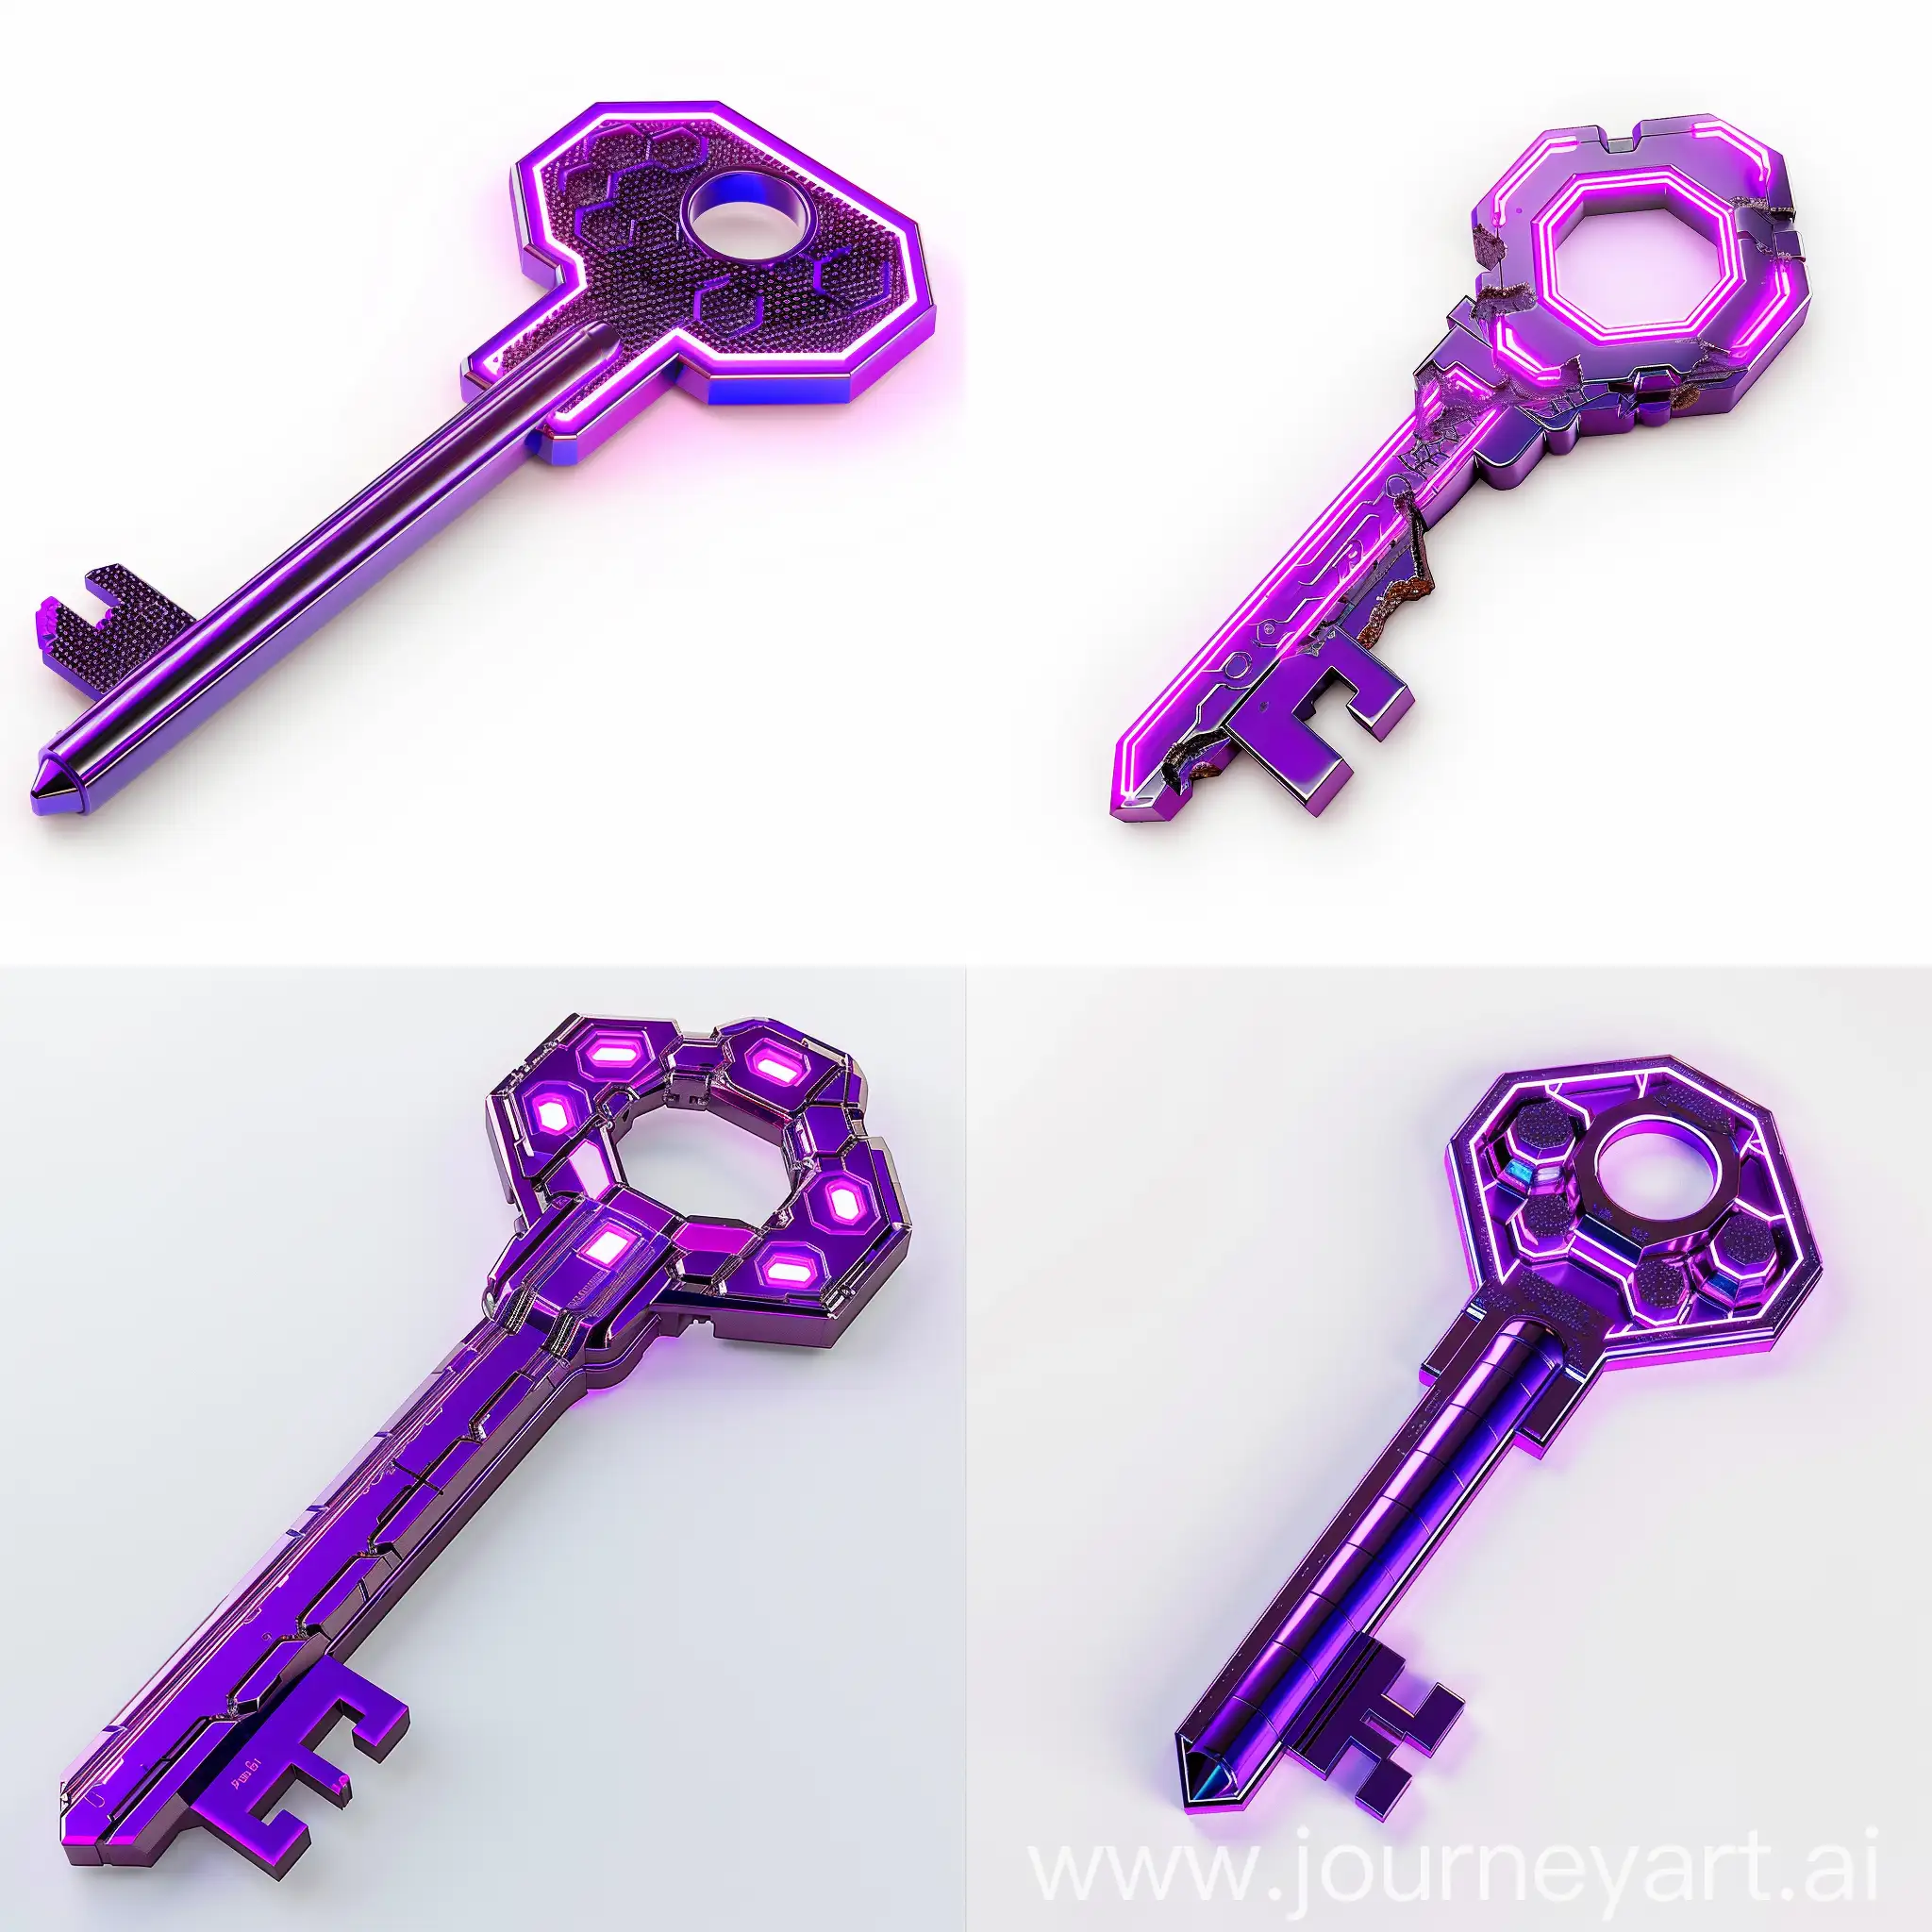 an image of a purple key. The key should appear to be made of a sleek, futuristic, cyberpunk-inspired material with a vibrant shade of purple. Some parts of the key should feature intricate neon purple hexagon patterns. The background should be completely clean and white, or in contrasting colors to the key, as I will need to remove the background easily